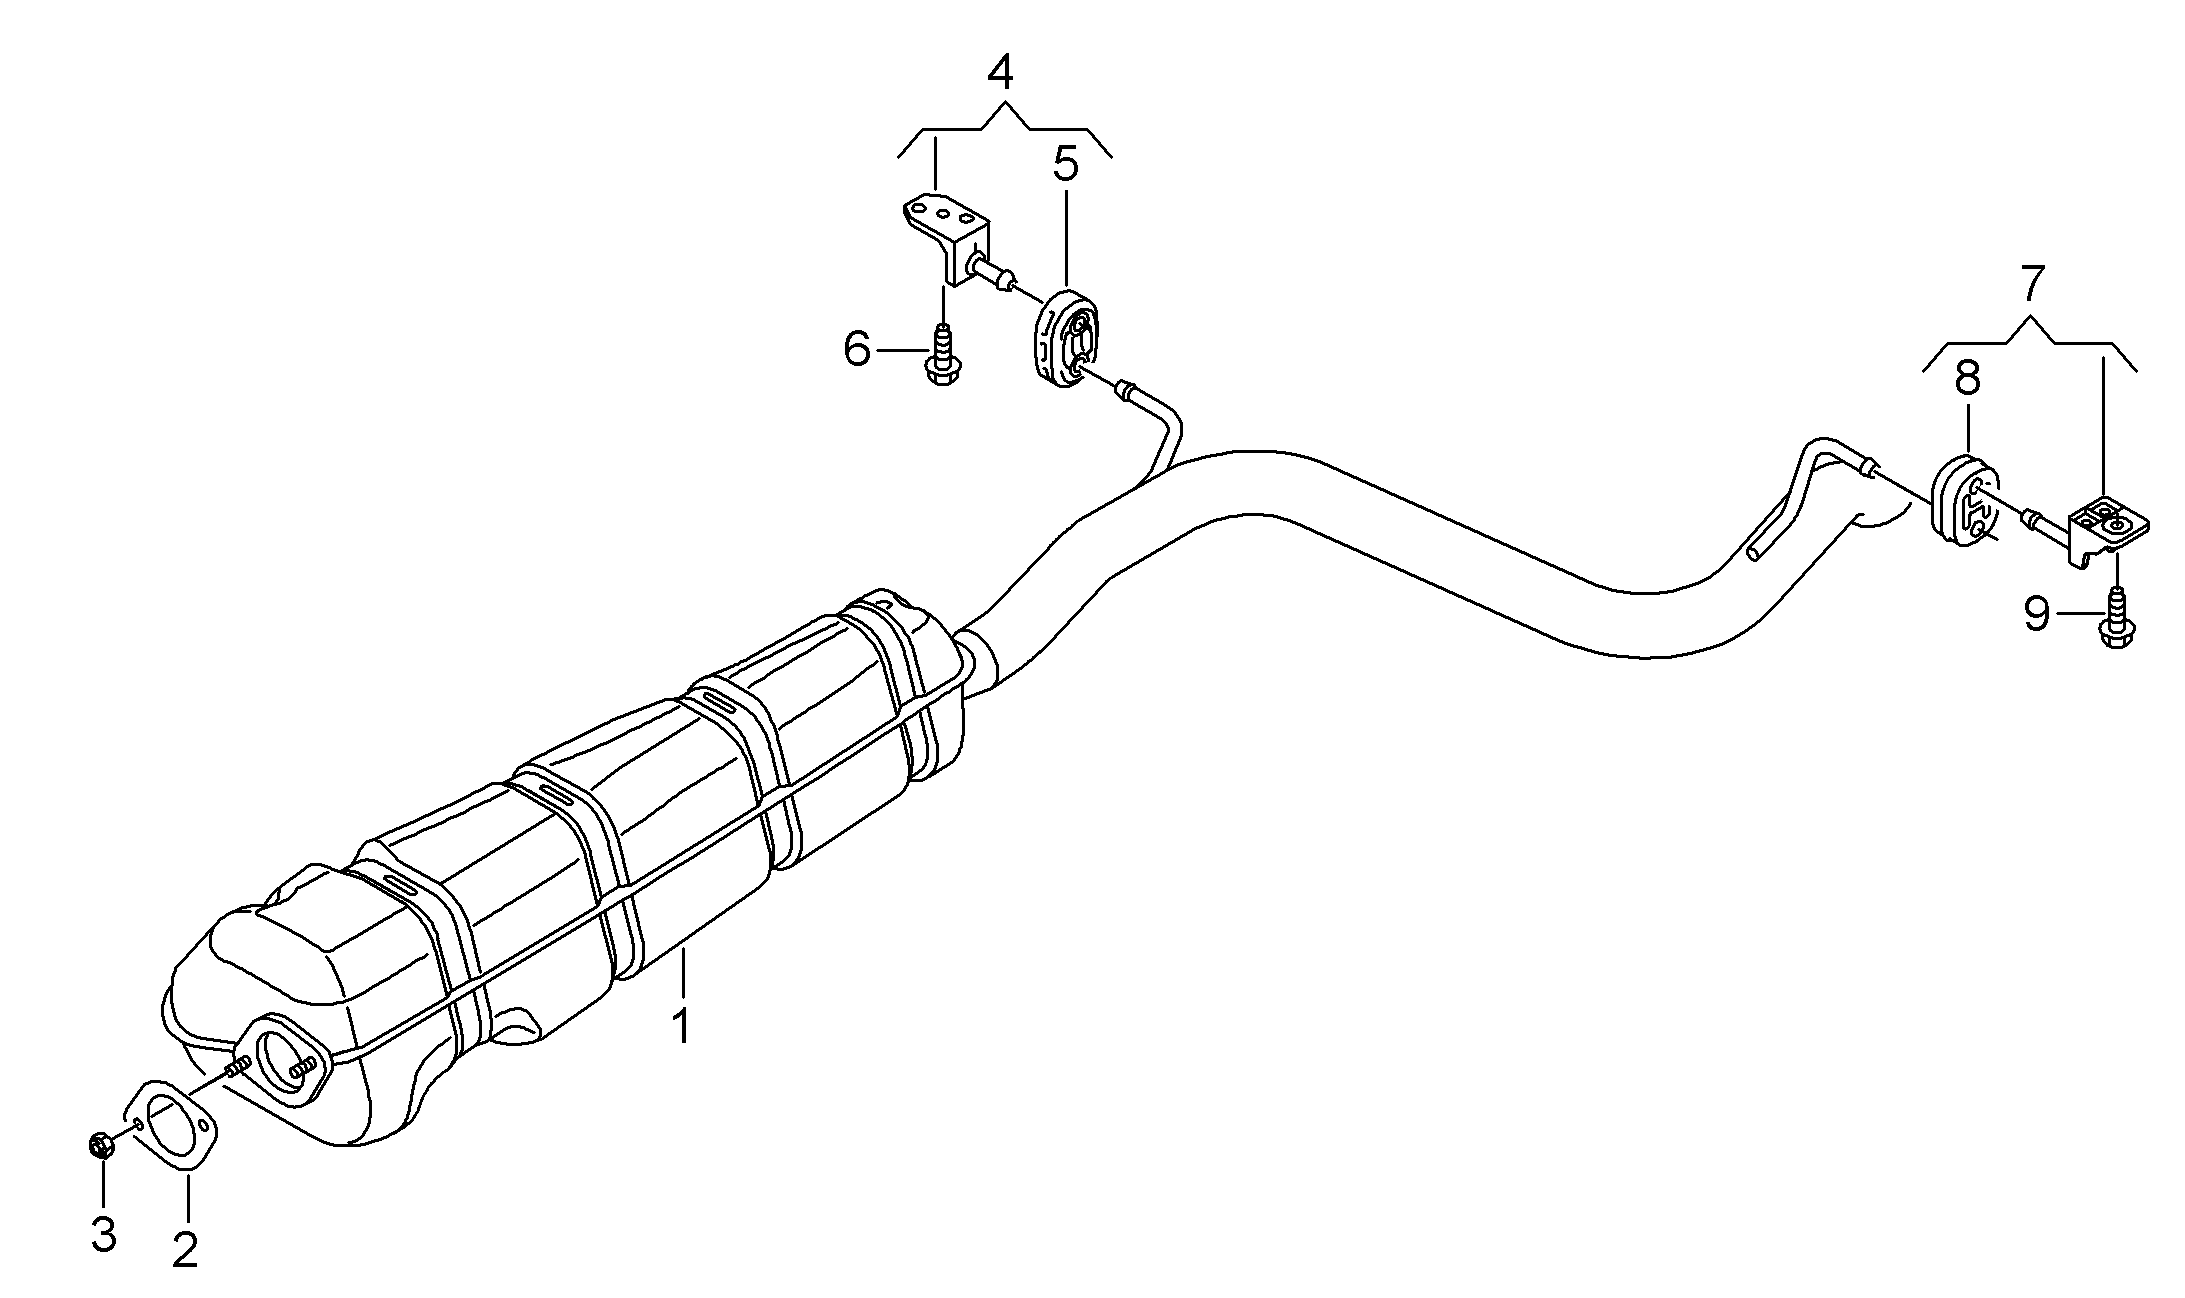 Centre silencer with<br>exhaust pipe natural gas<br>operation - Golf/Variant/4Motion - golf